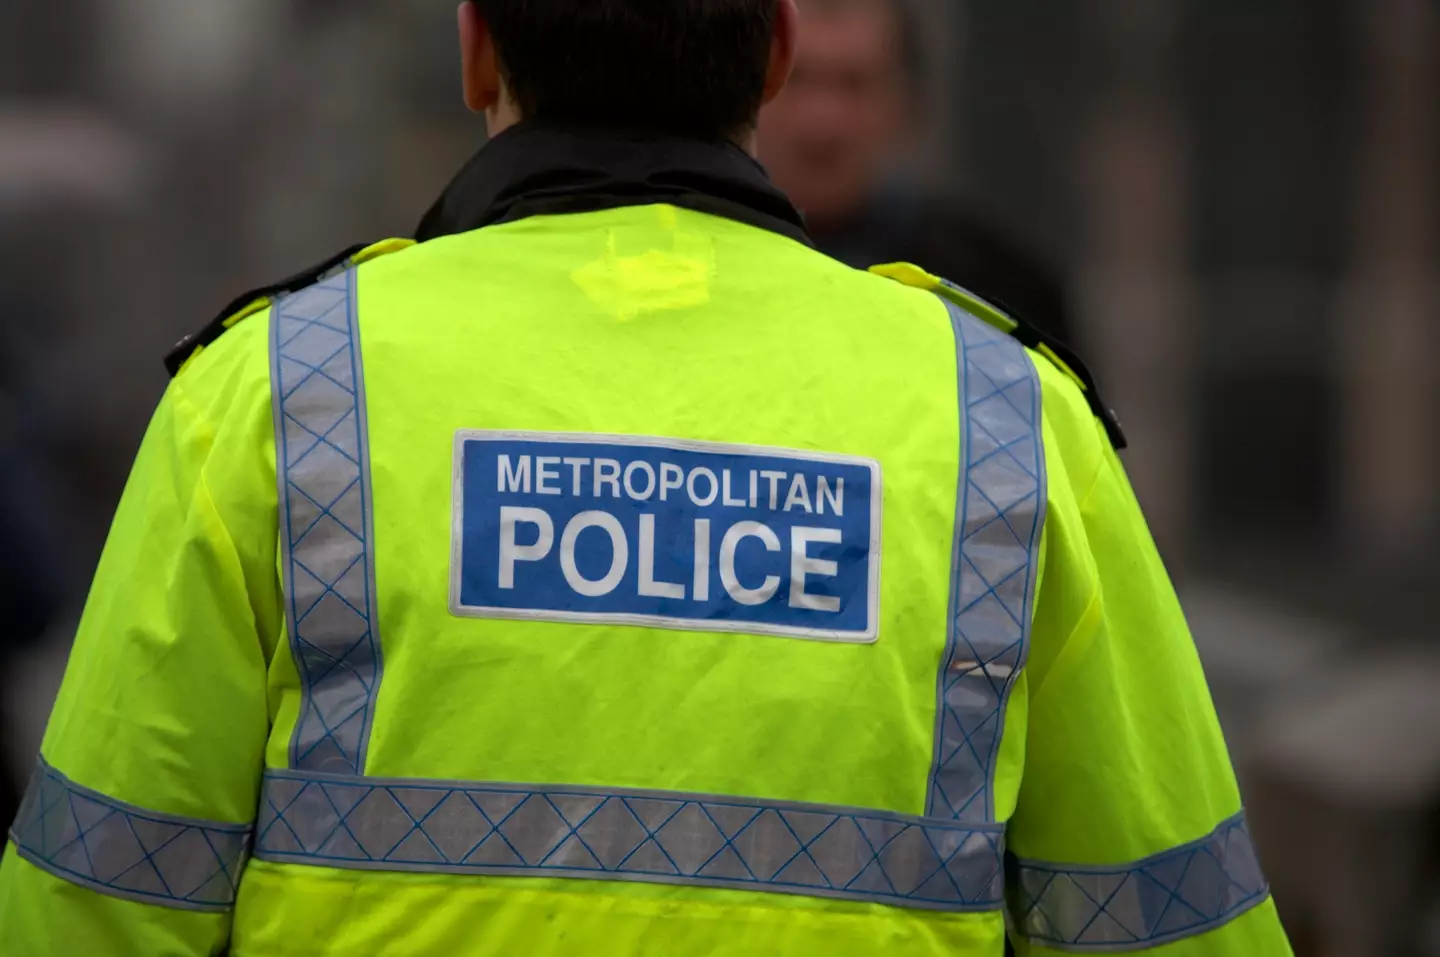 The Metropolitan Police said they encouraged people to contact them 'no matter how long ago it happened'.